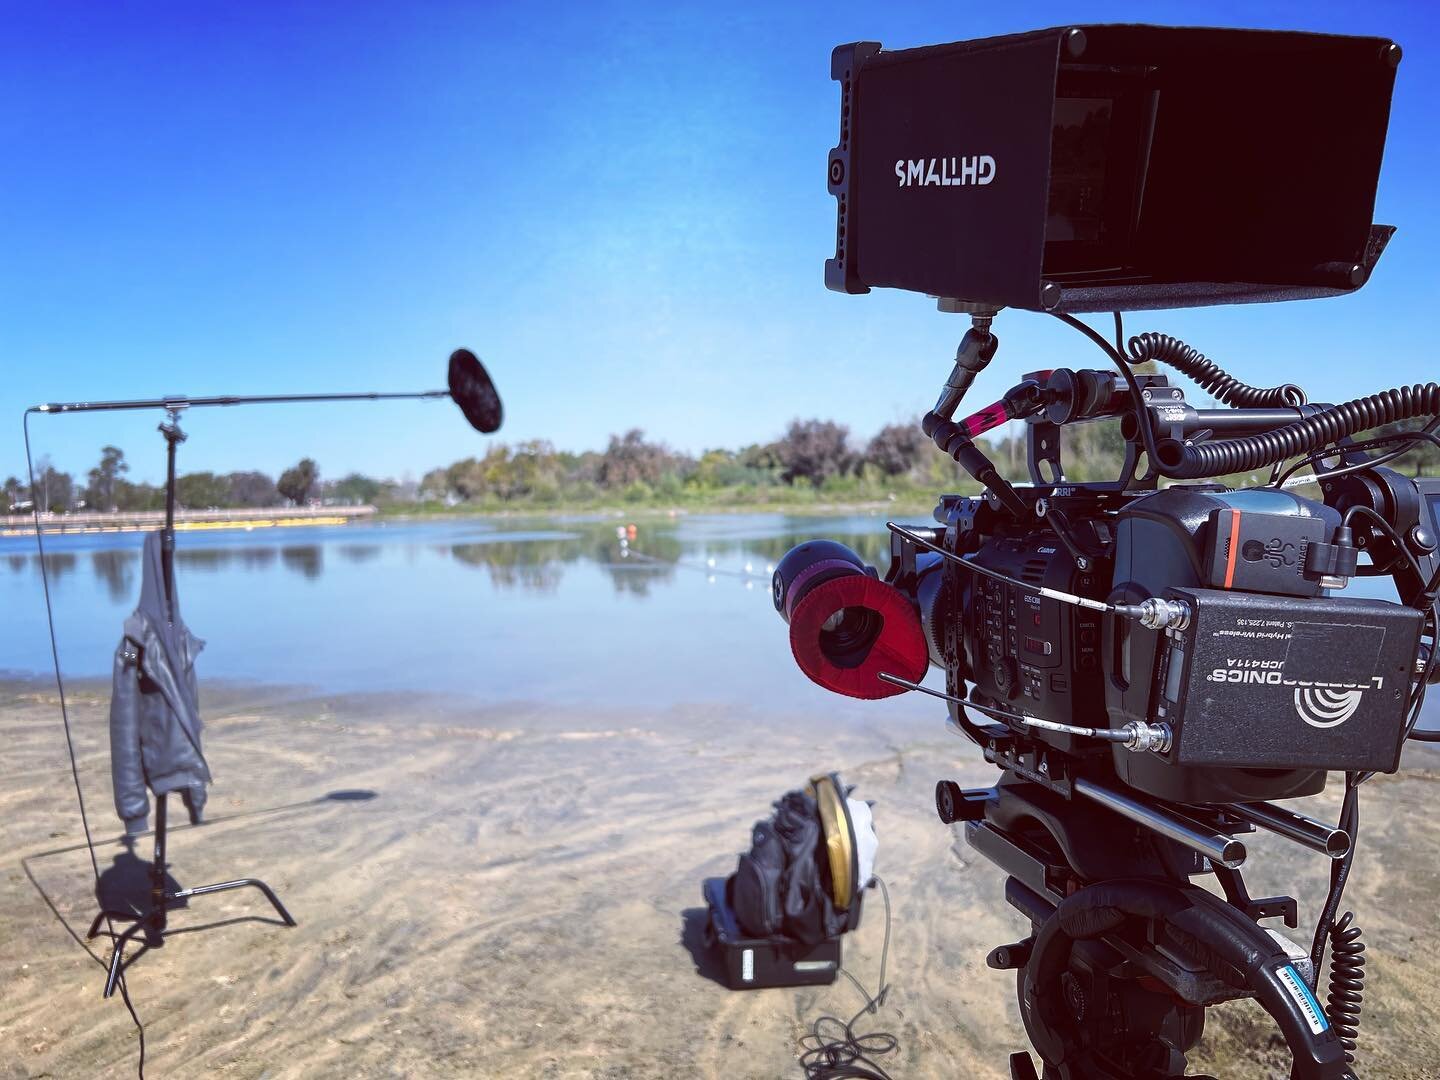 Today, we interviewed a lagoon.

 #videoproductioncompany #videoproduction #videoshoot #marketingvideo #marketing #videoproductionla #corporatevideographer #corporatevideo #contentprovider #interview #commercialvideo #behindthescenes #bts #losangeles